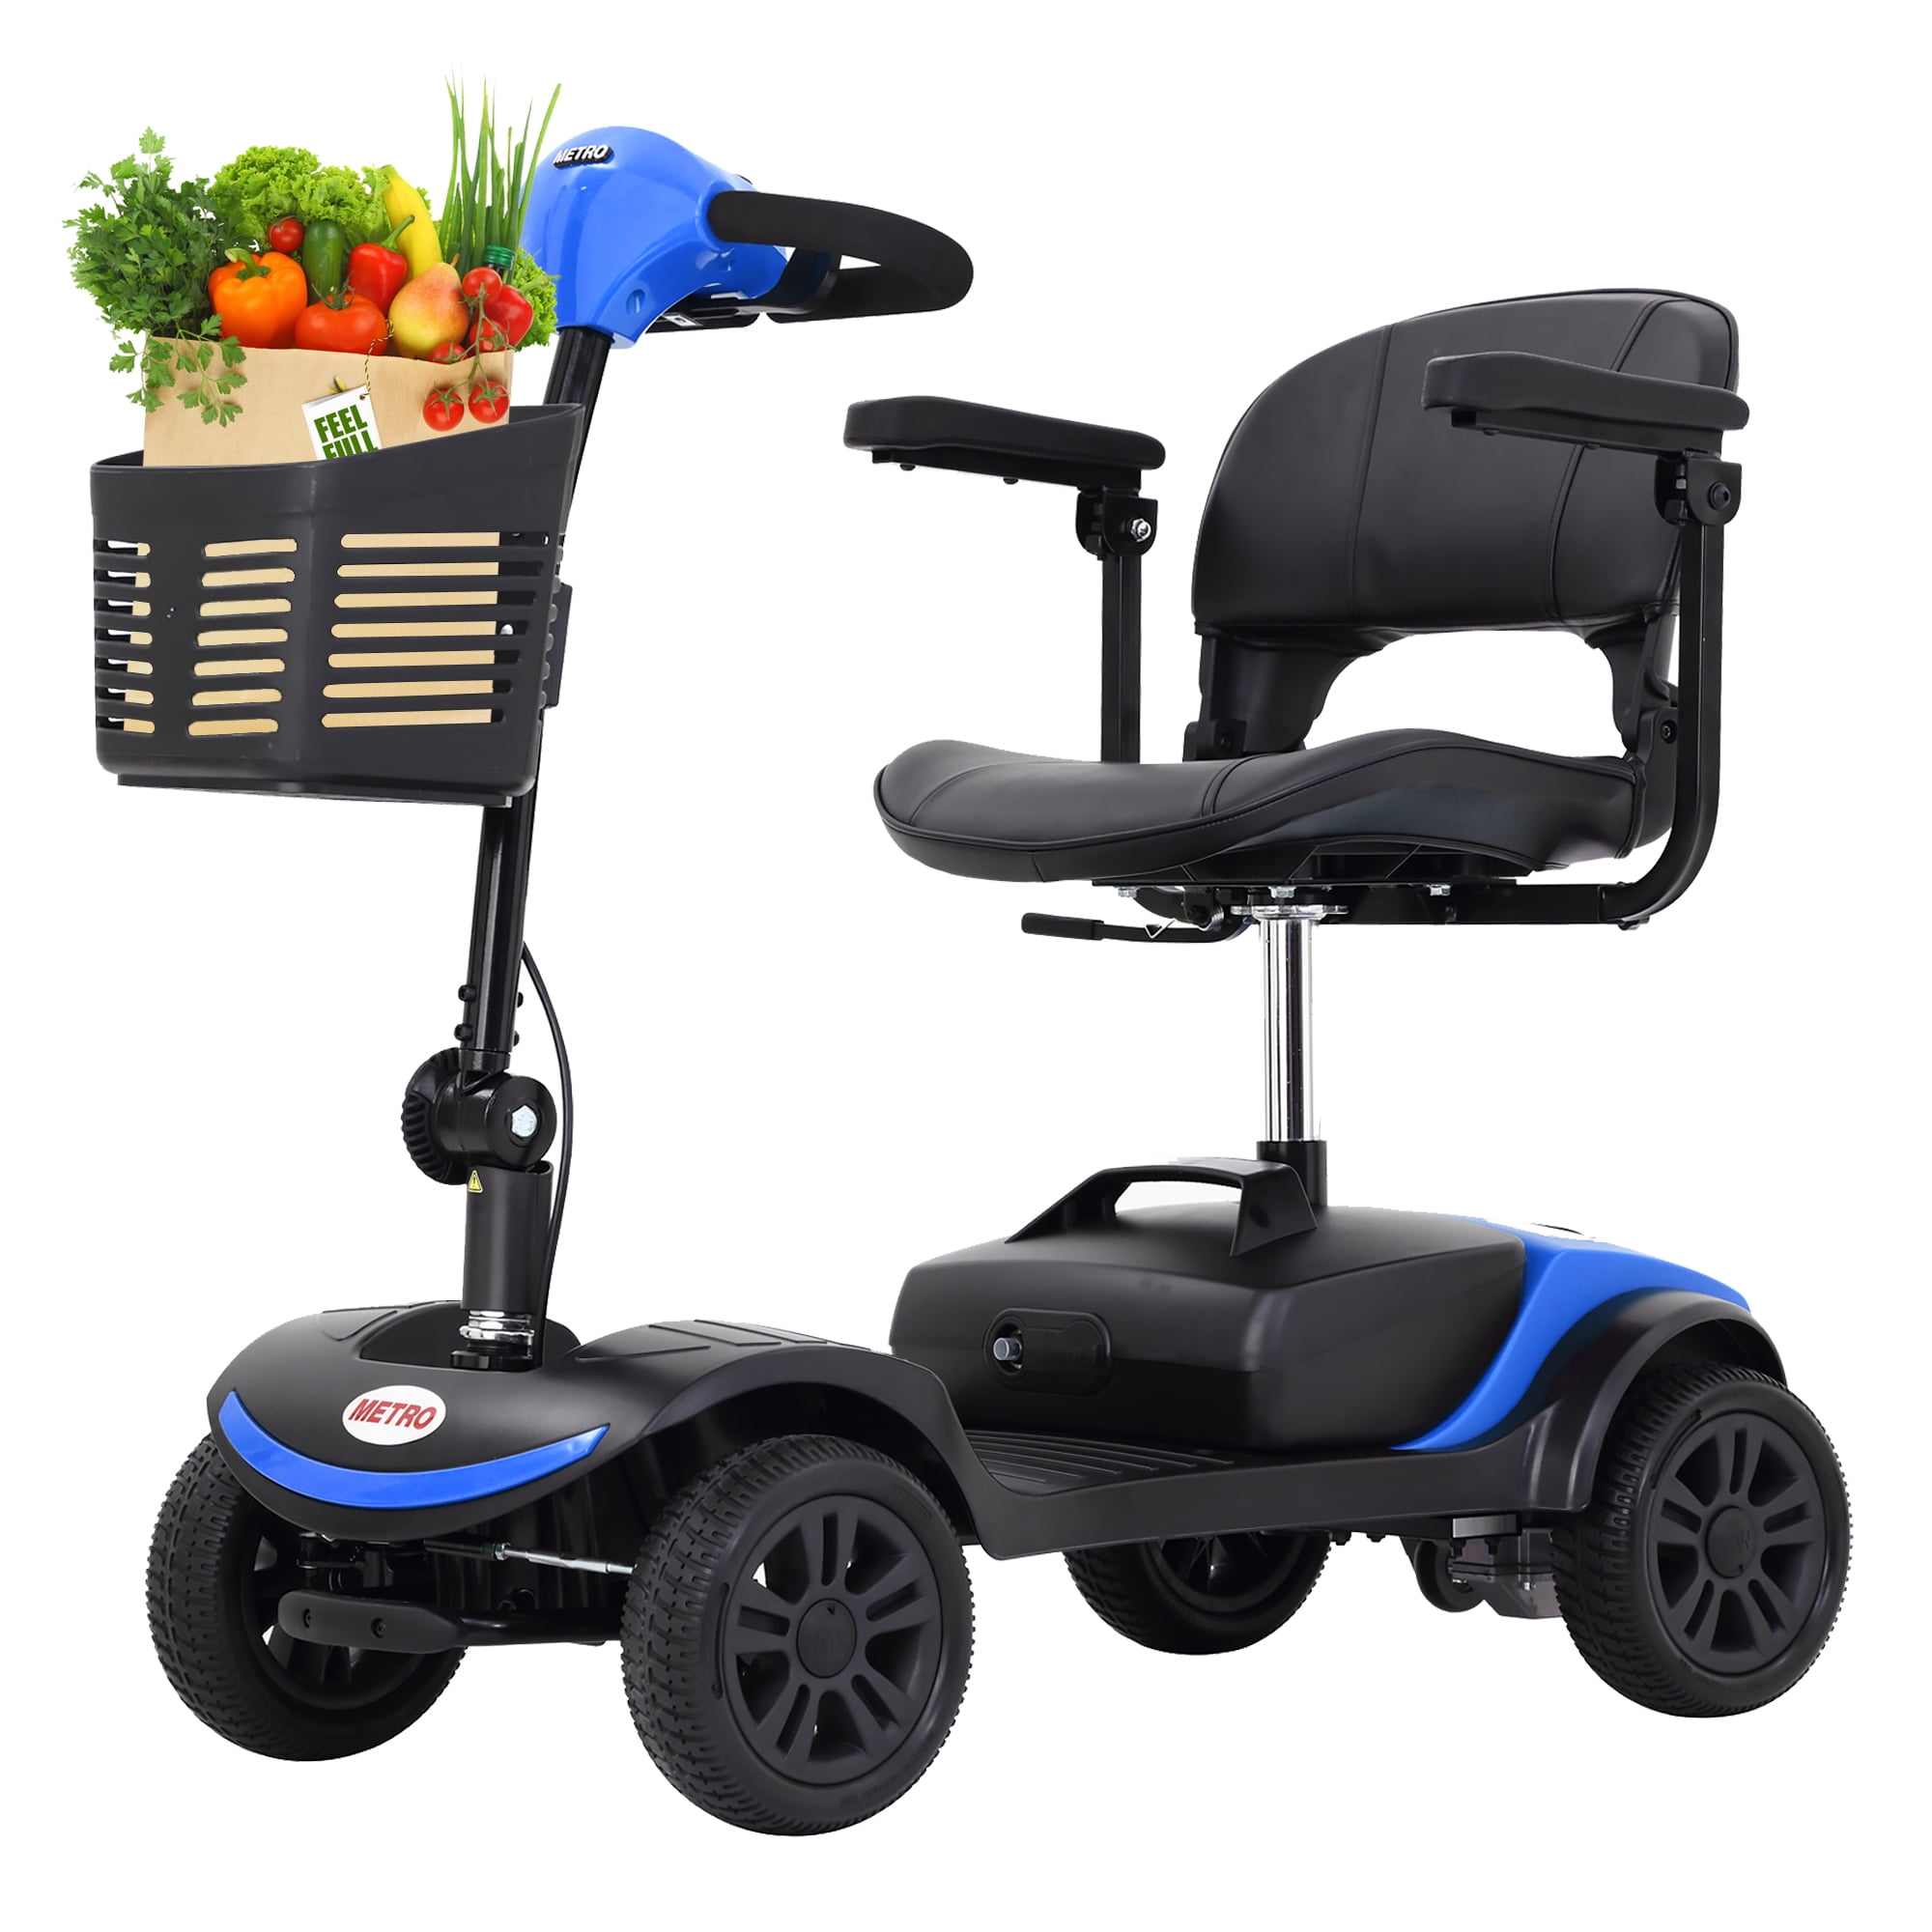 Seniors Motorized Scooters Adults, 4 Wheel Electrical Scooter with Detachable Basket, Motorized Electric Carts for Seniors, Adults, Max Speed 5Mph, 265lbs, SS546 - Walmart.com